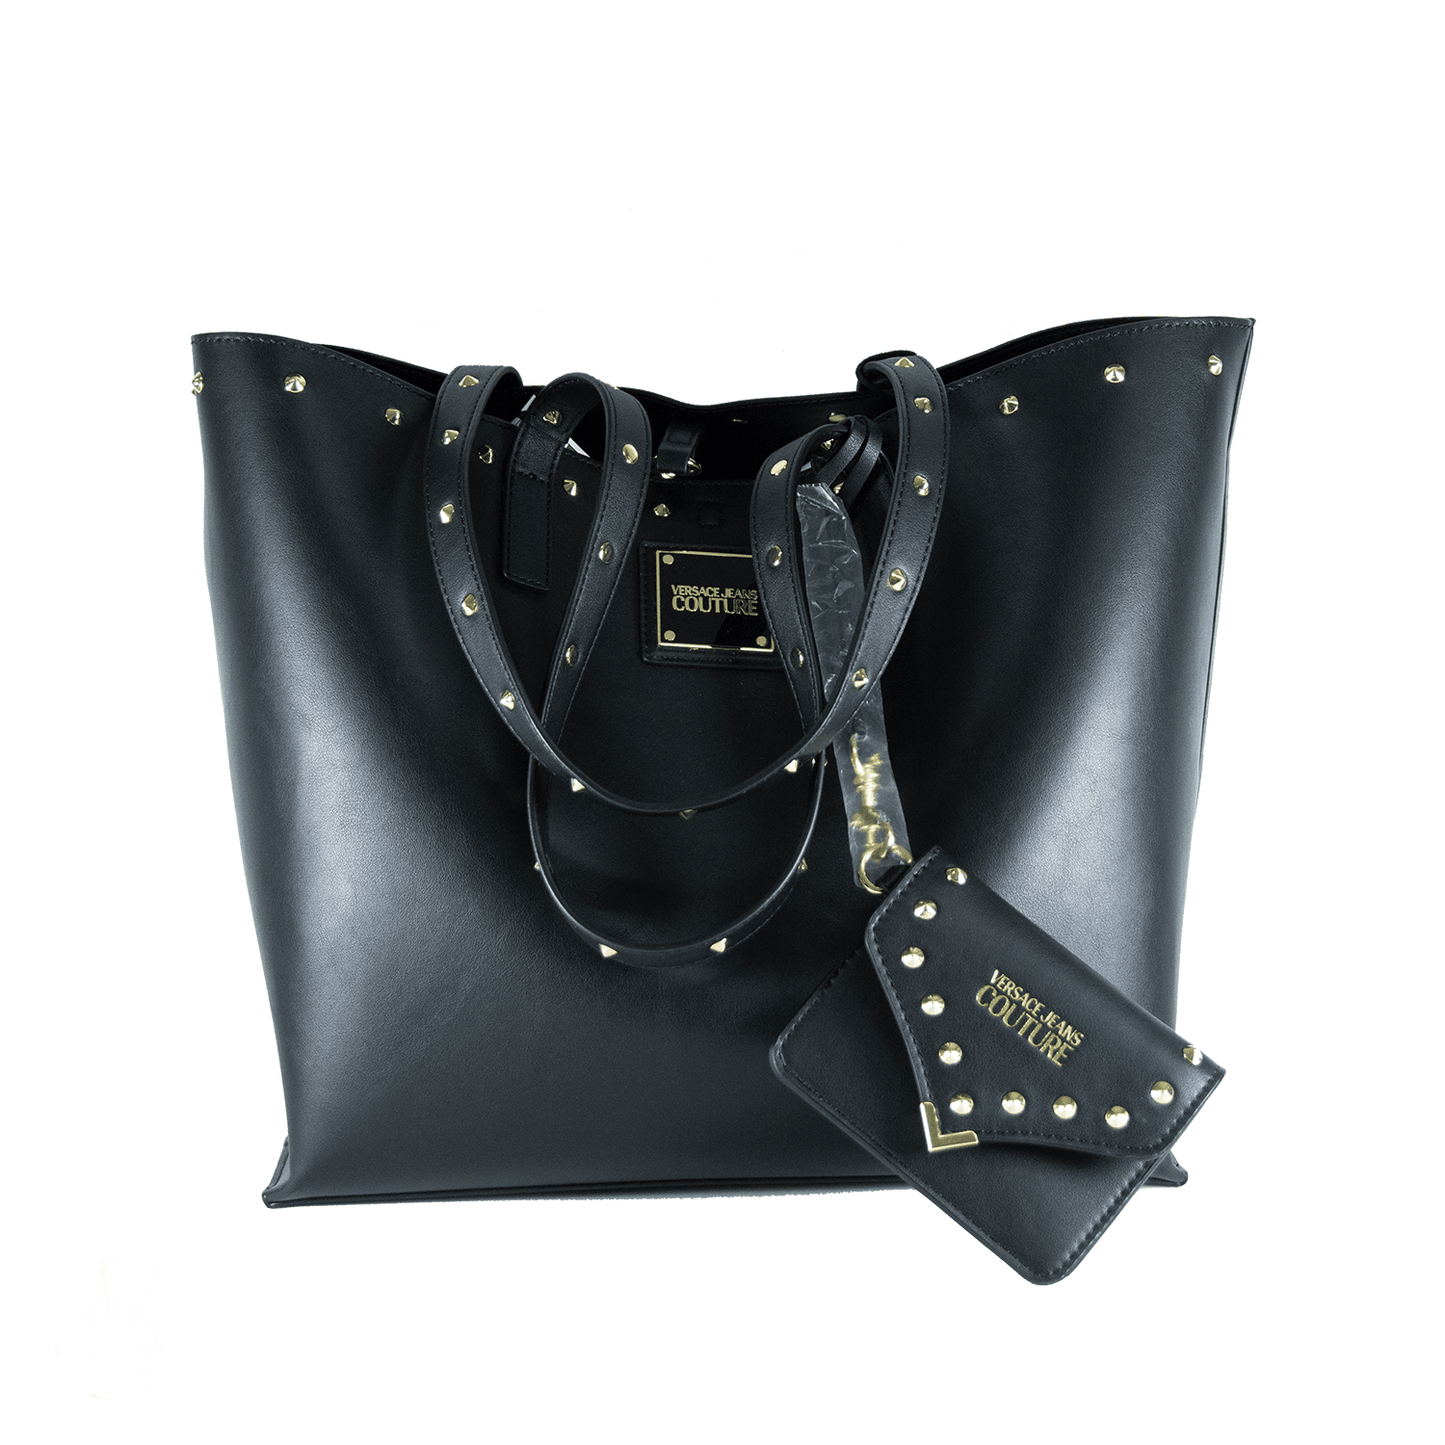 Versace Jeans Couture Negro Stud Tote Bag w/ Wallet - ipawnishop.com